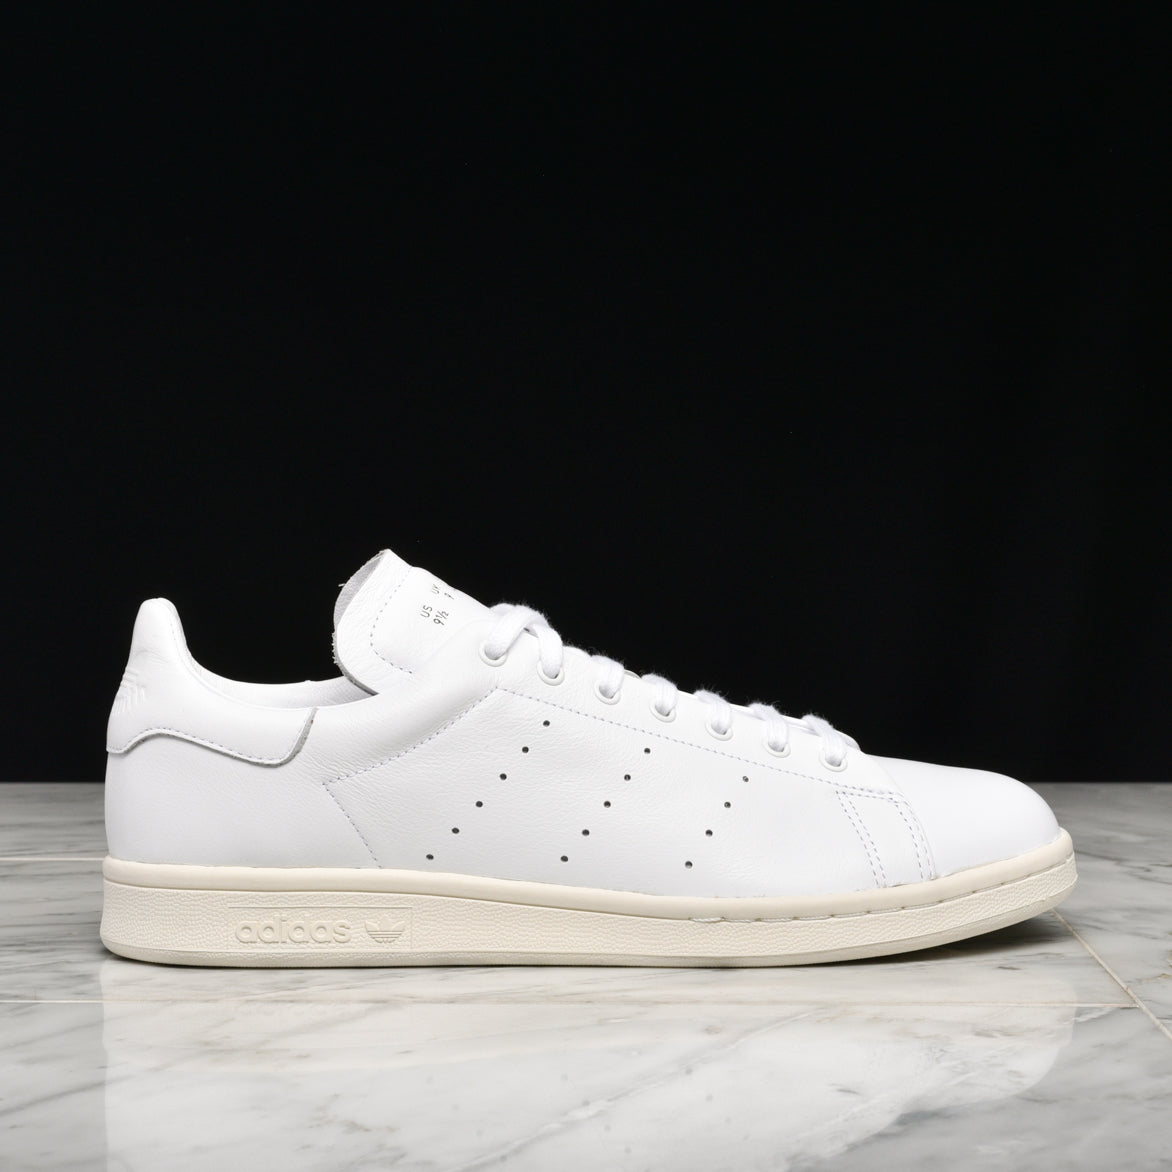 umoral fumle højdepunkt STAN SMITH RECONSTRUCTED - WHITE / OFF WHITE | lapstoneandhammer.com